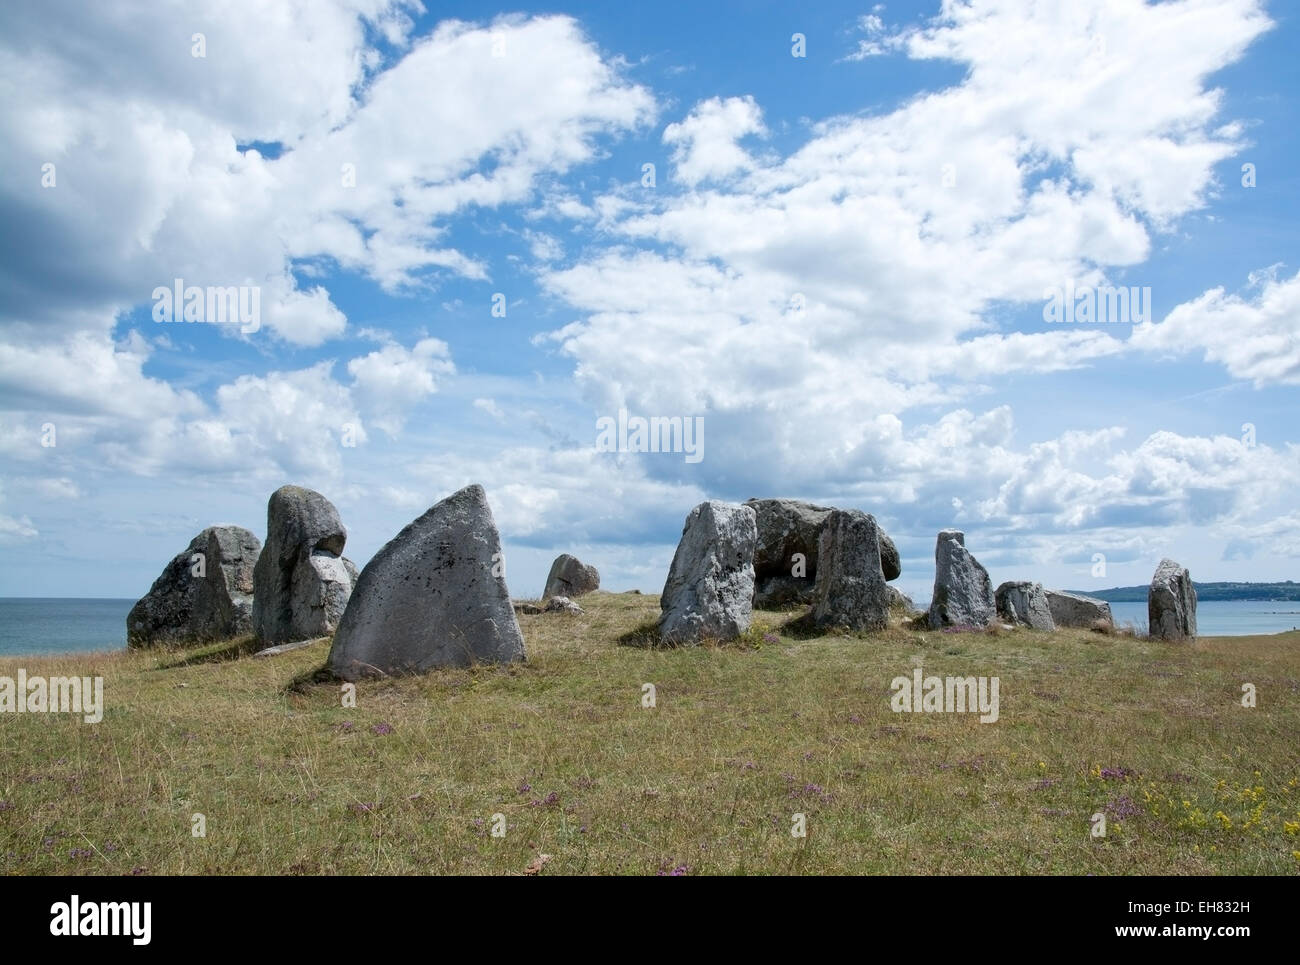 Ancient stone structure by Skane coast, Sweden in June. Stock Photo